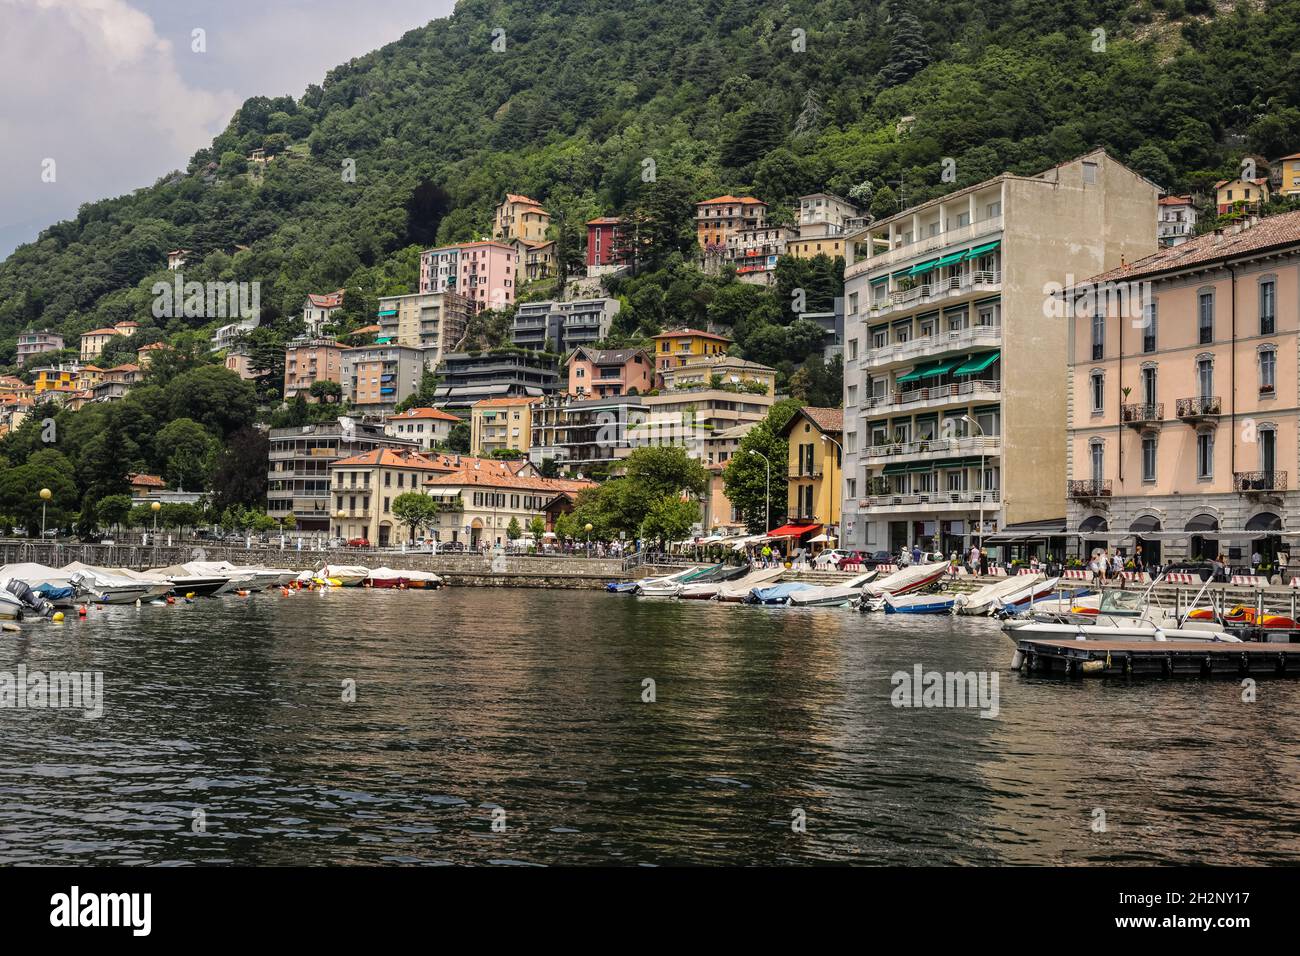 Como, Italy - June 15, 2017: View of Traditional Colorful Buildings in Lake Como on a Cloudy Day Stock Photo